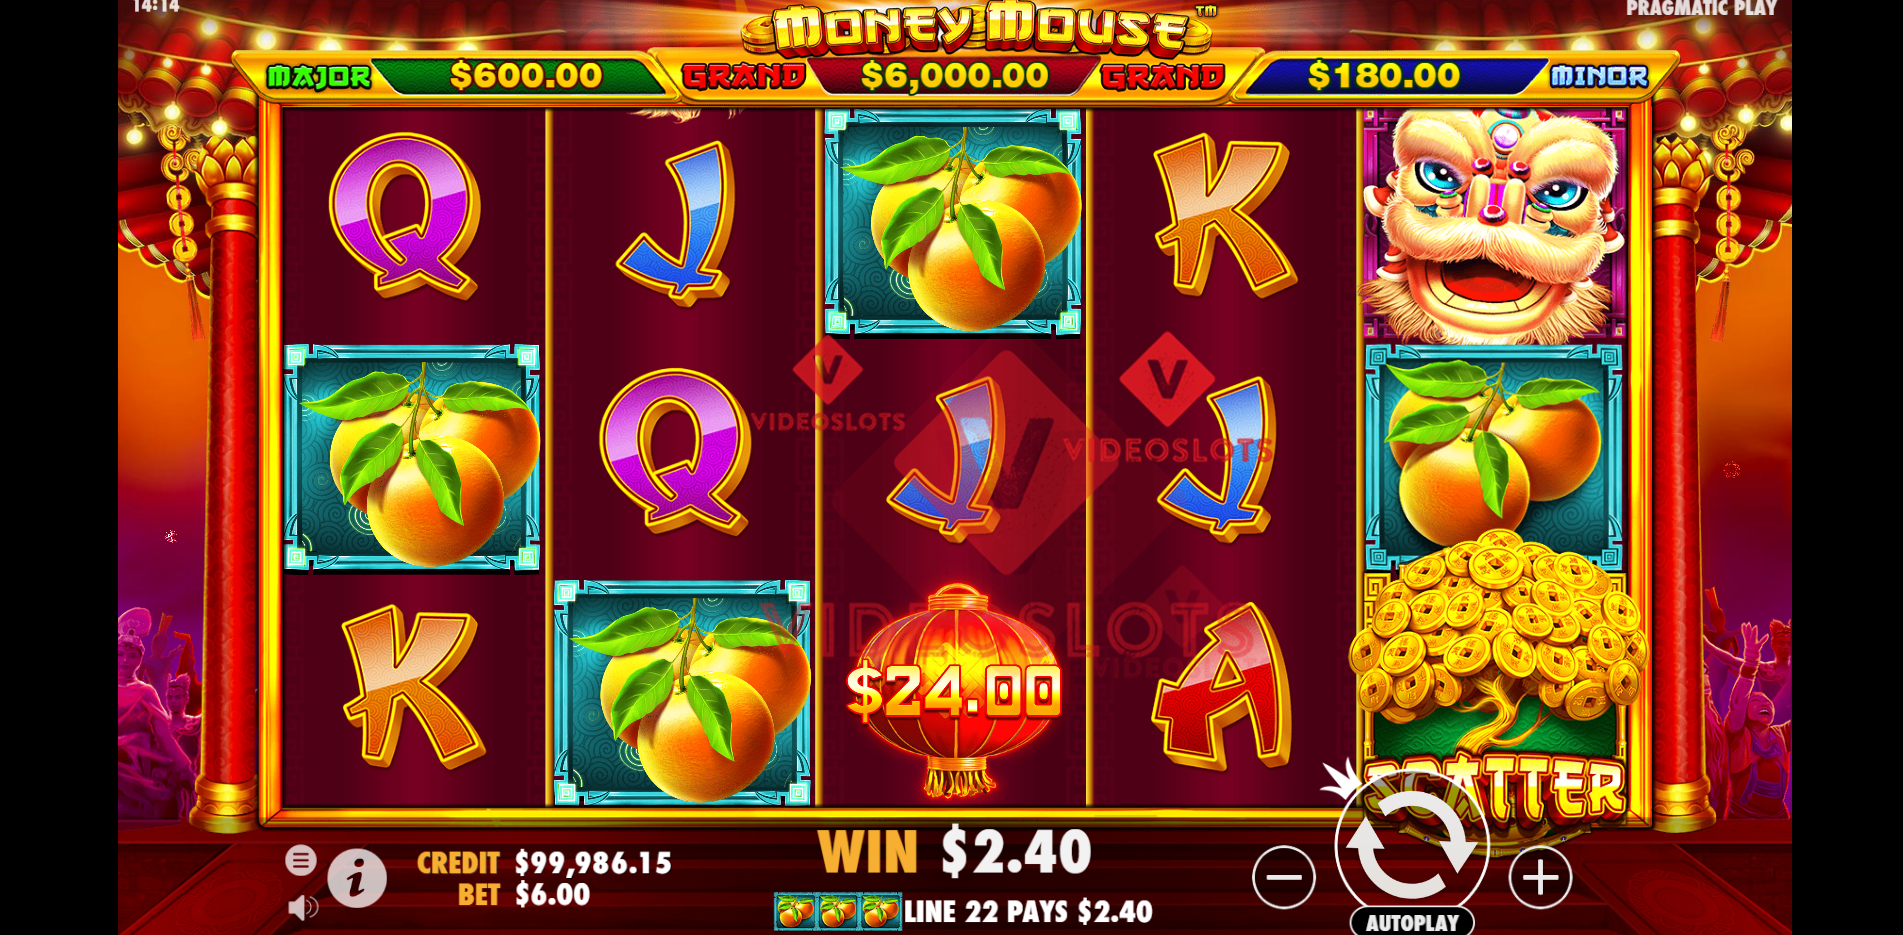 Base Game for Money Mouse slot by Pragmatic Play